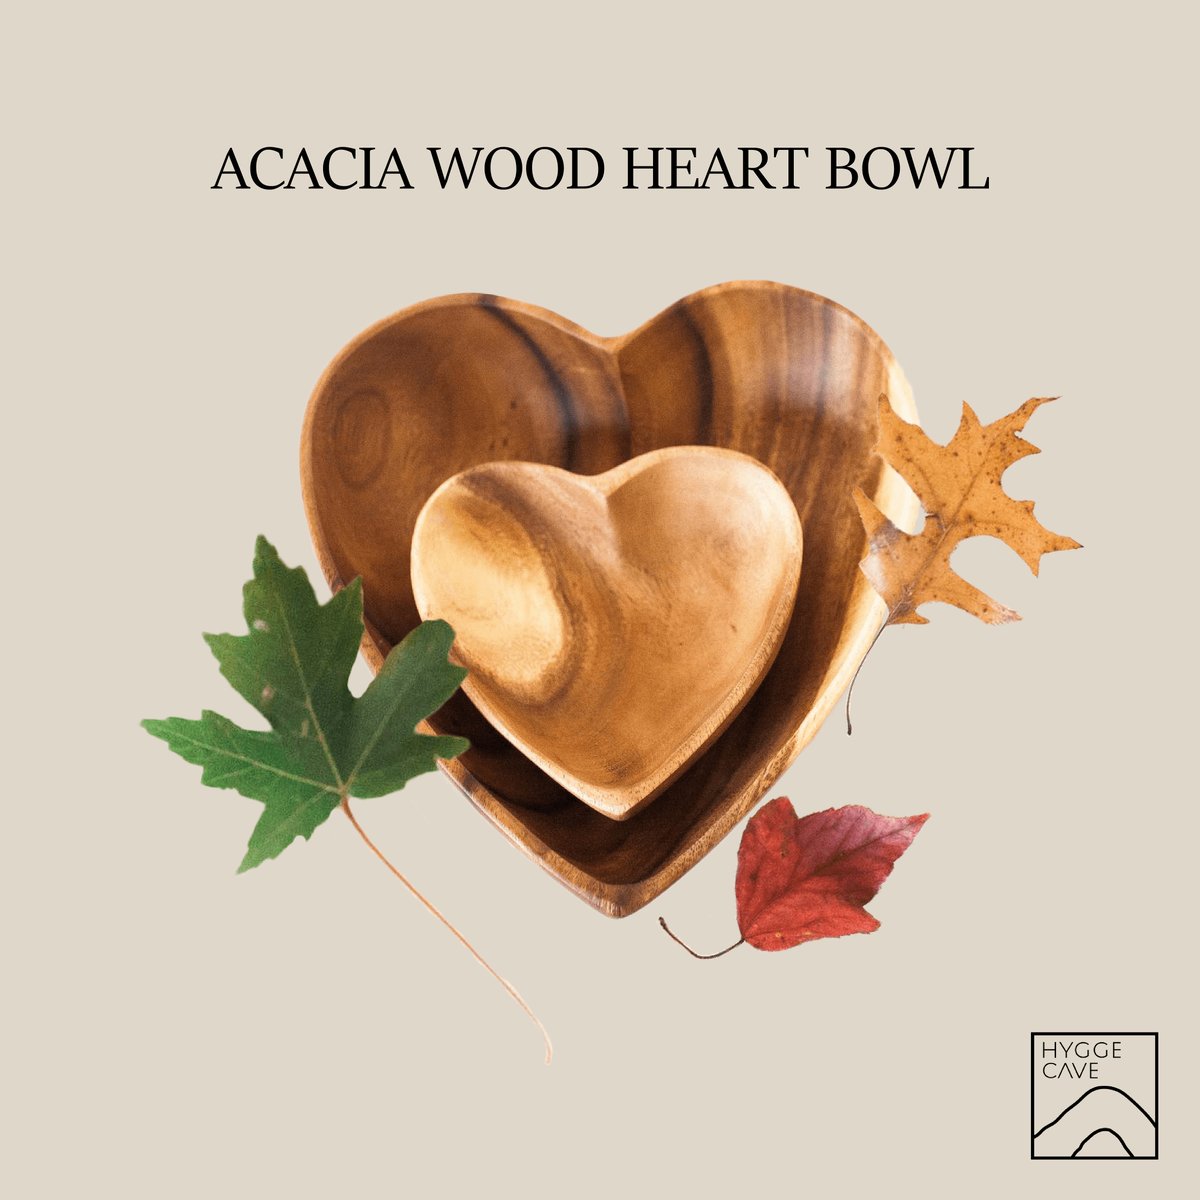 Hello, Fall! 🍂
Masterfully hand-carved by a small team in the Philippines, this heart bowl is a must for your collection. Use it to serve at your next party, place it on a shelf as decor, or gift it to your loved-one.
hyggecave.com
#hyggecave #heartbowl #acaciawood